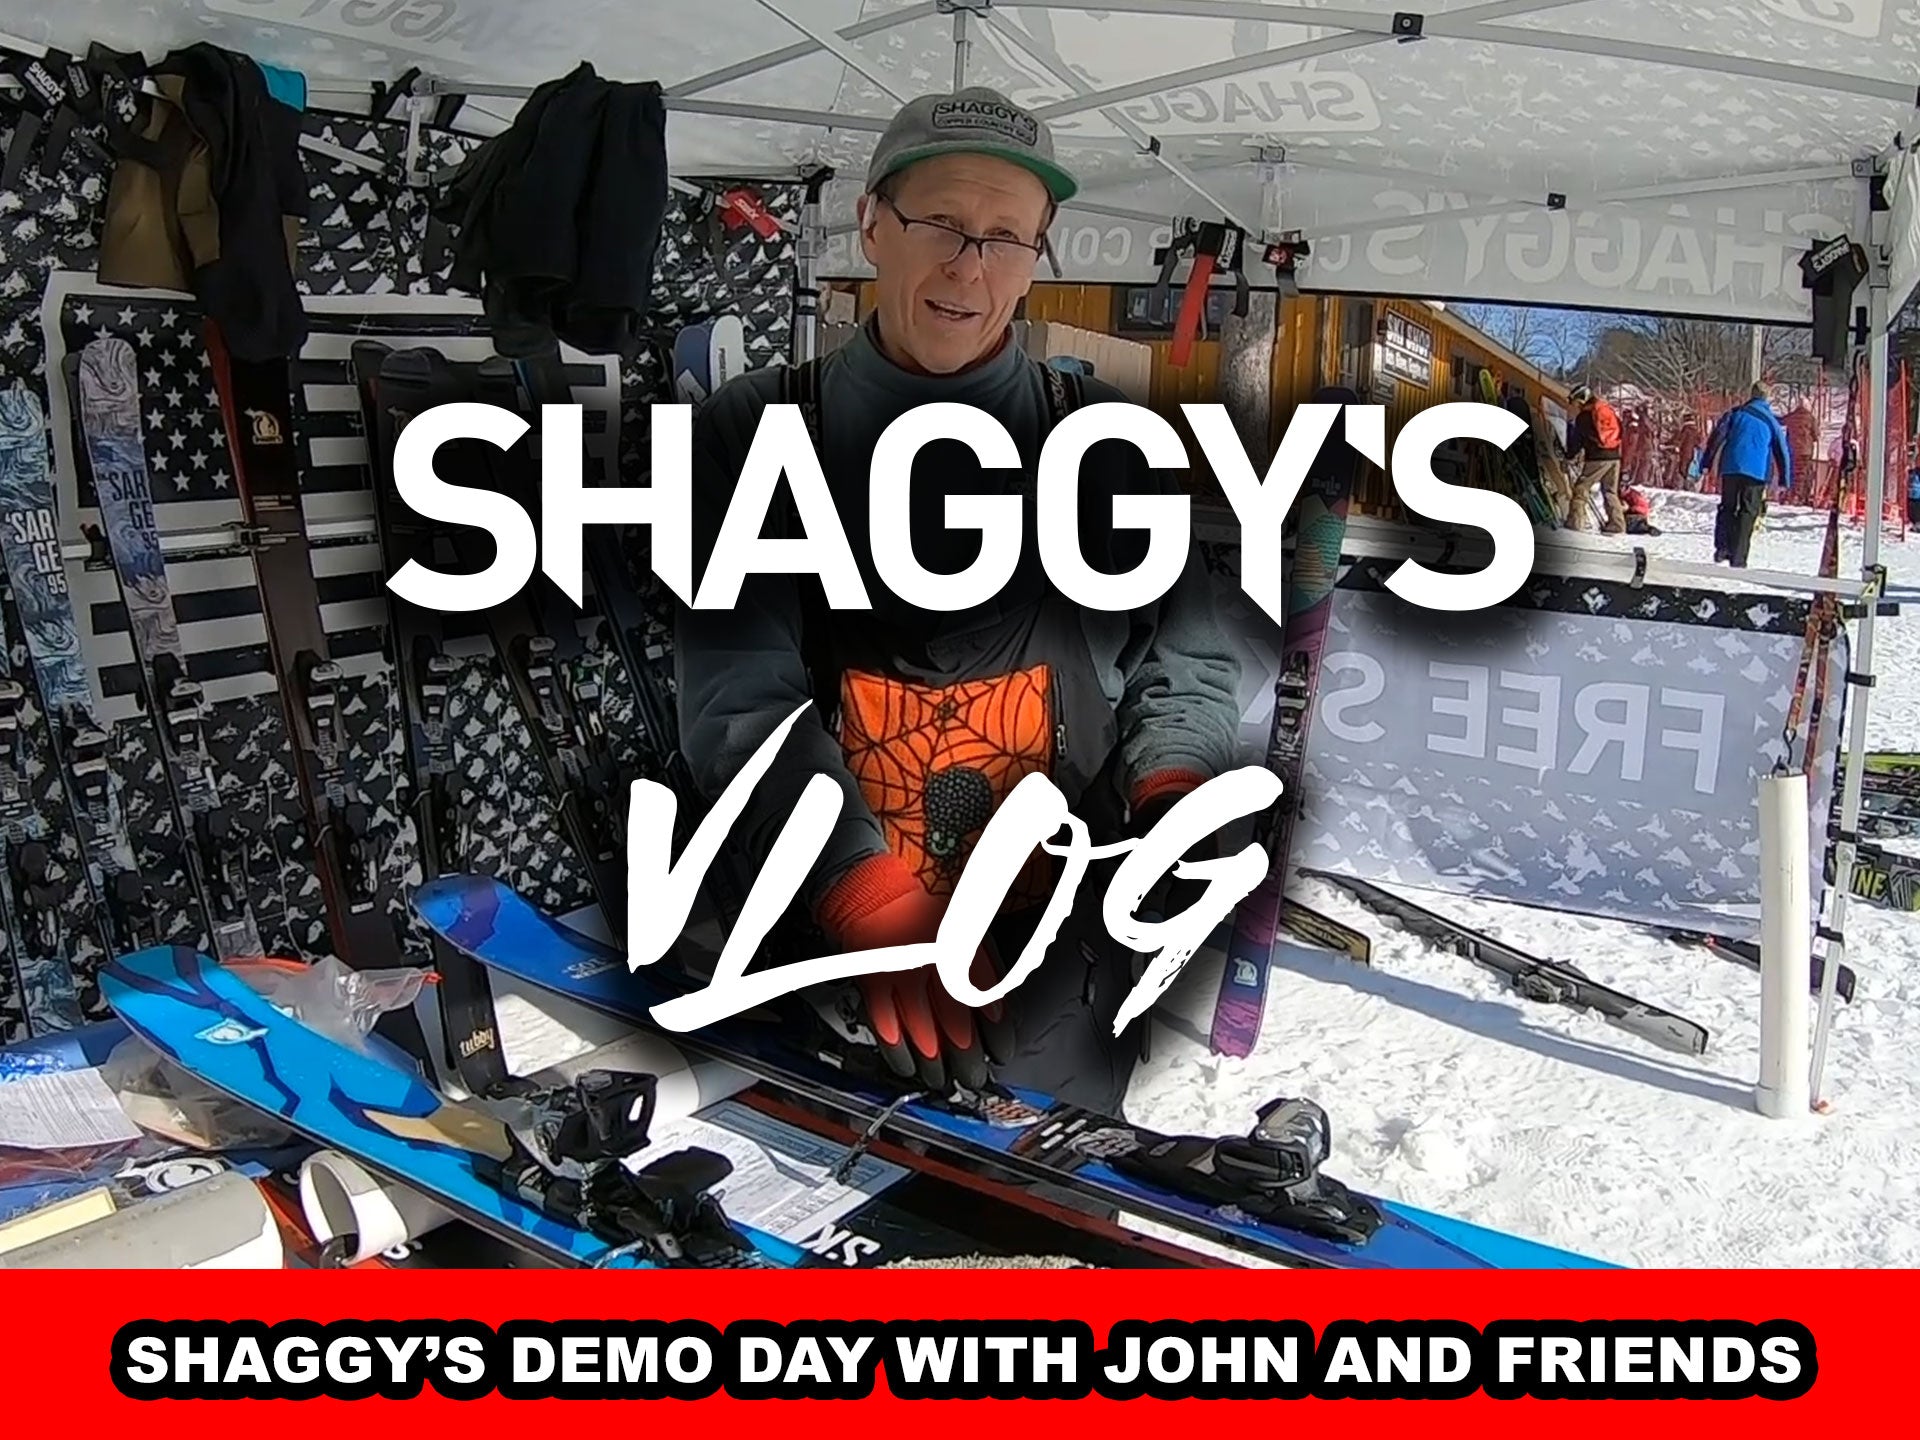 VLOG 016 - Shaggy's Demo Day with John and Friends